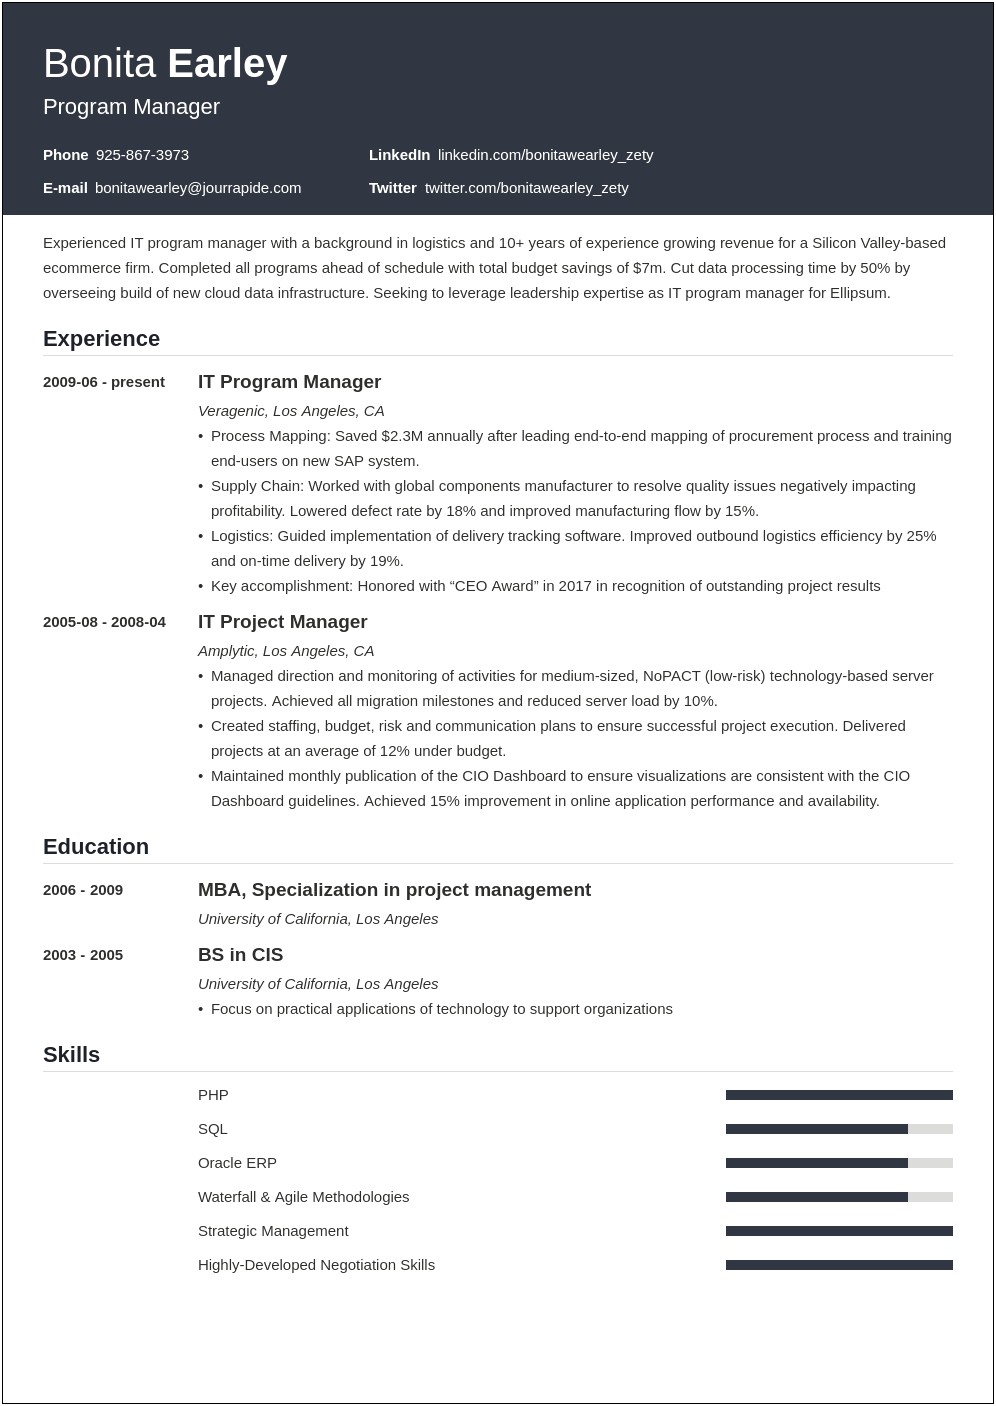 Program Manager Resume Objective Examples